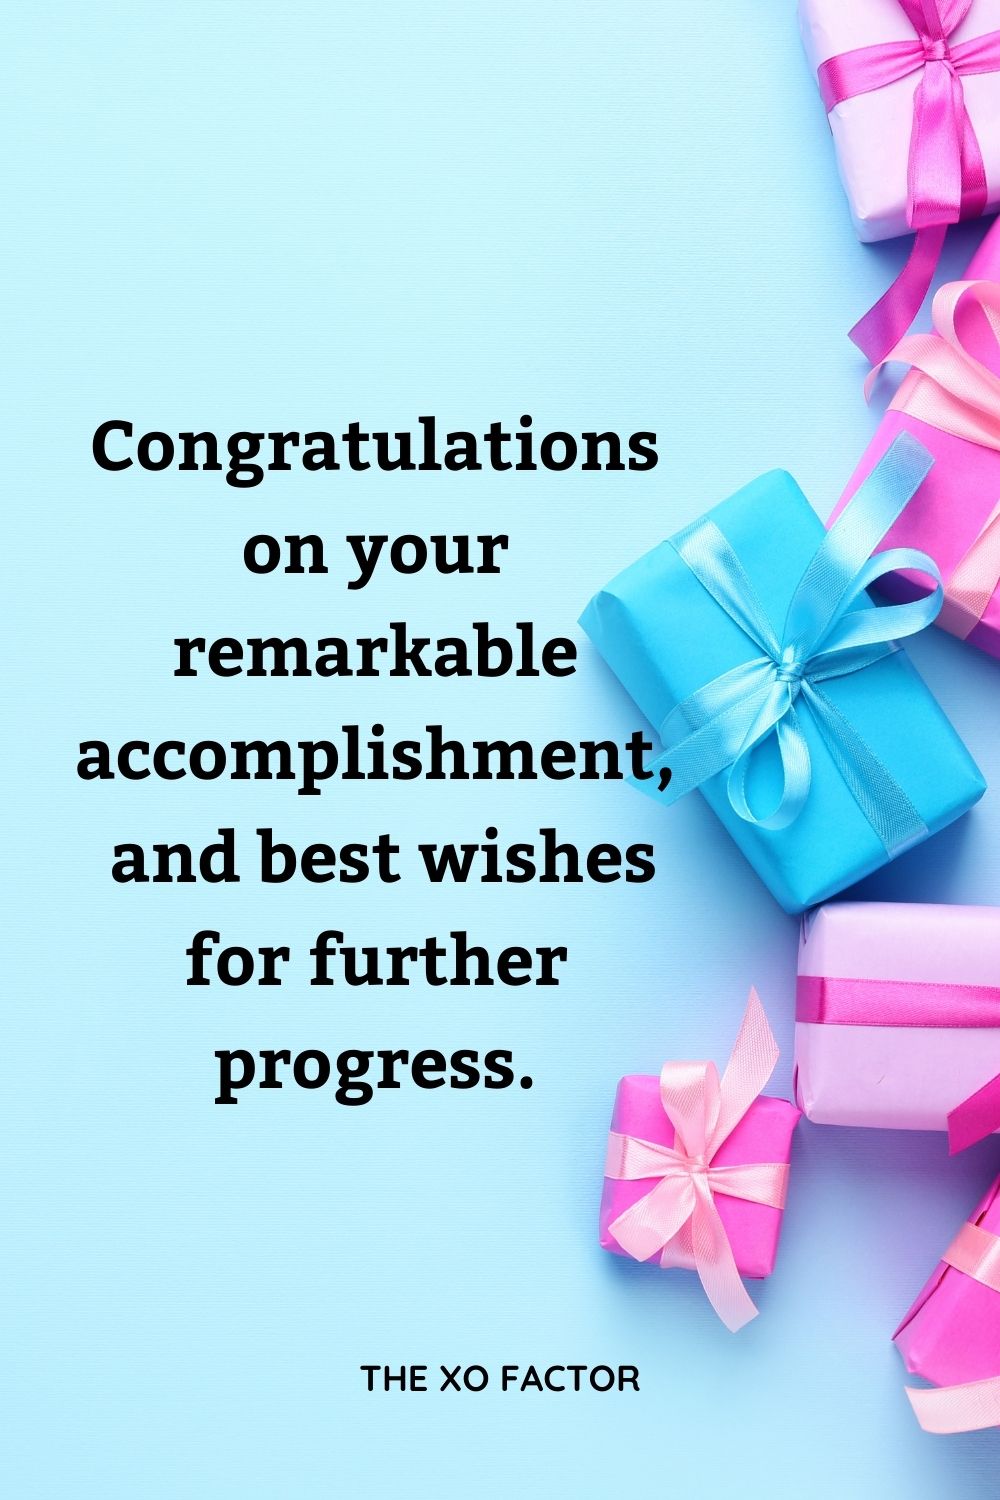 Congratulations on your remarkable accomplishment, and best wishes for further progress.